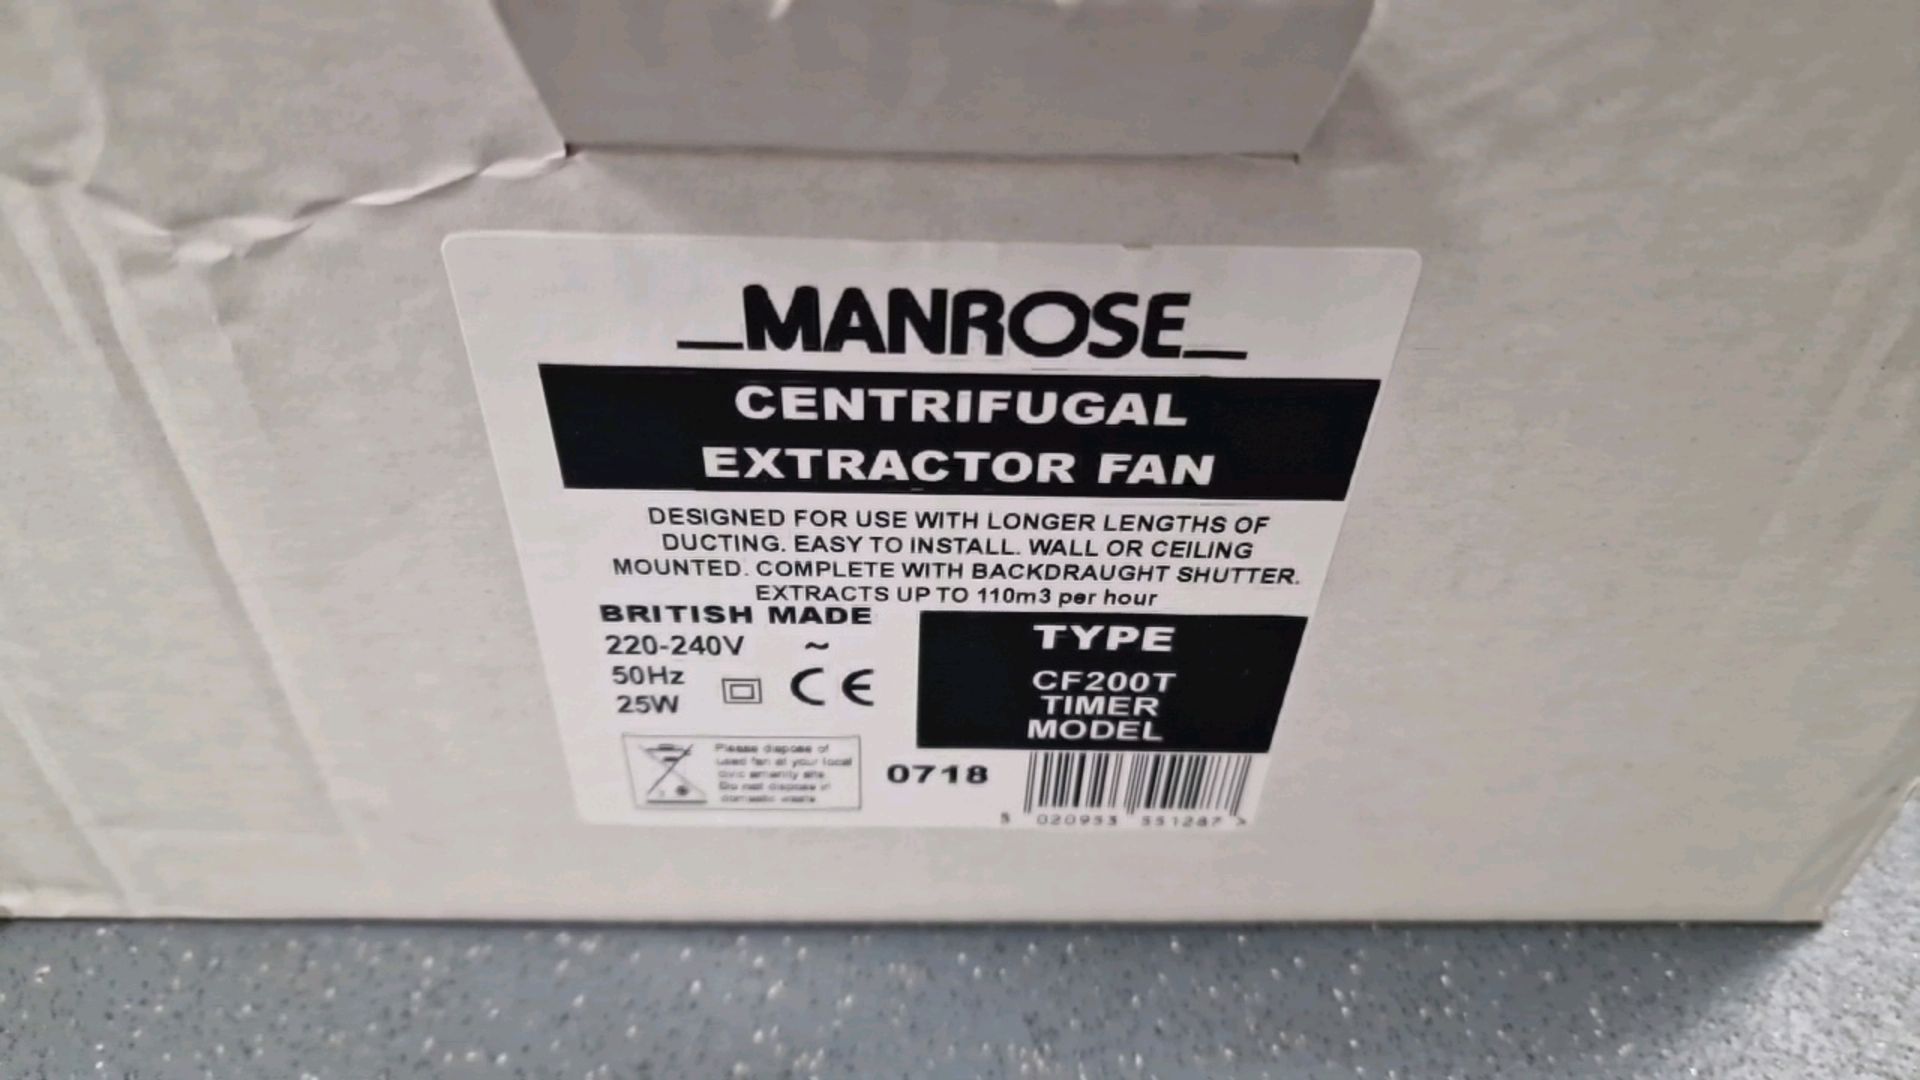 Manrose Centrifugal Extractor Fan - Image 3 of 4